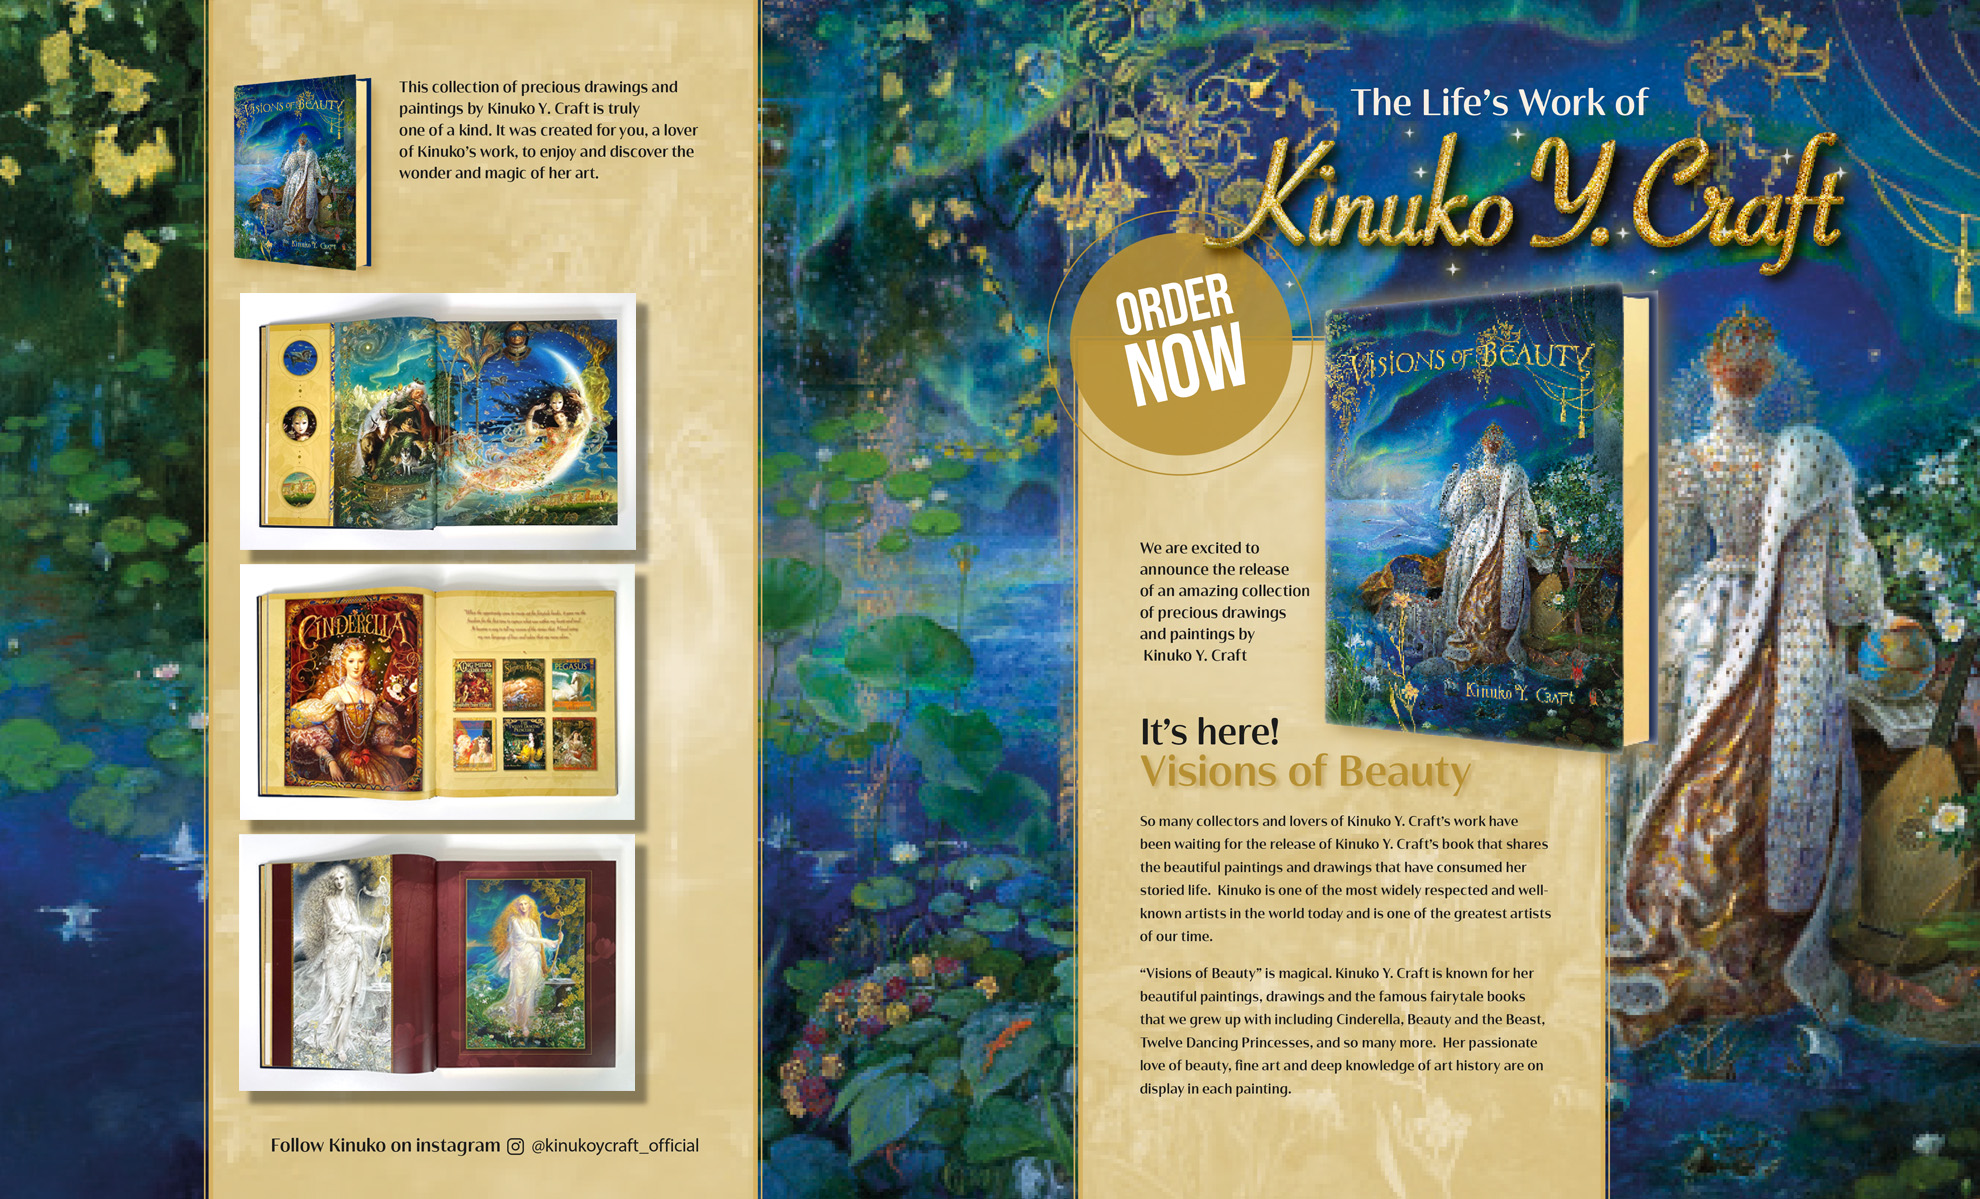 Visions Of Beauty by Kinuko Y. Craft